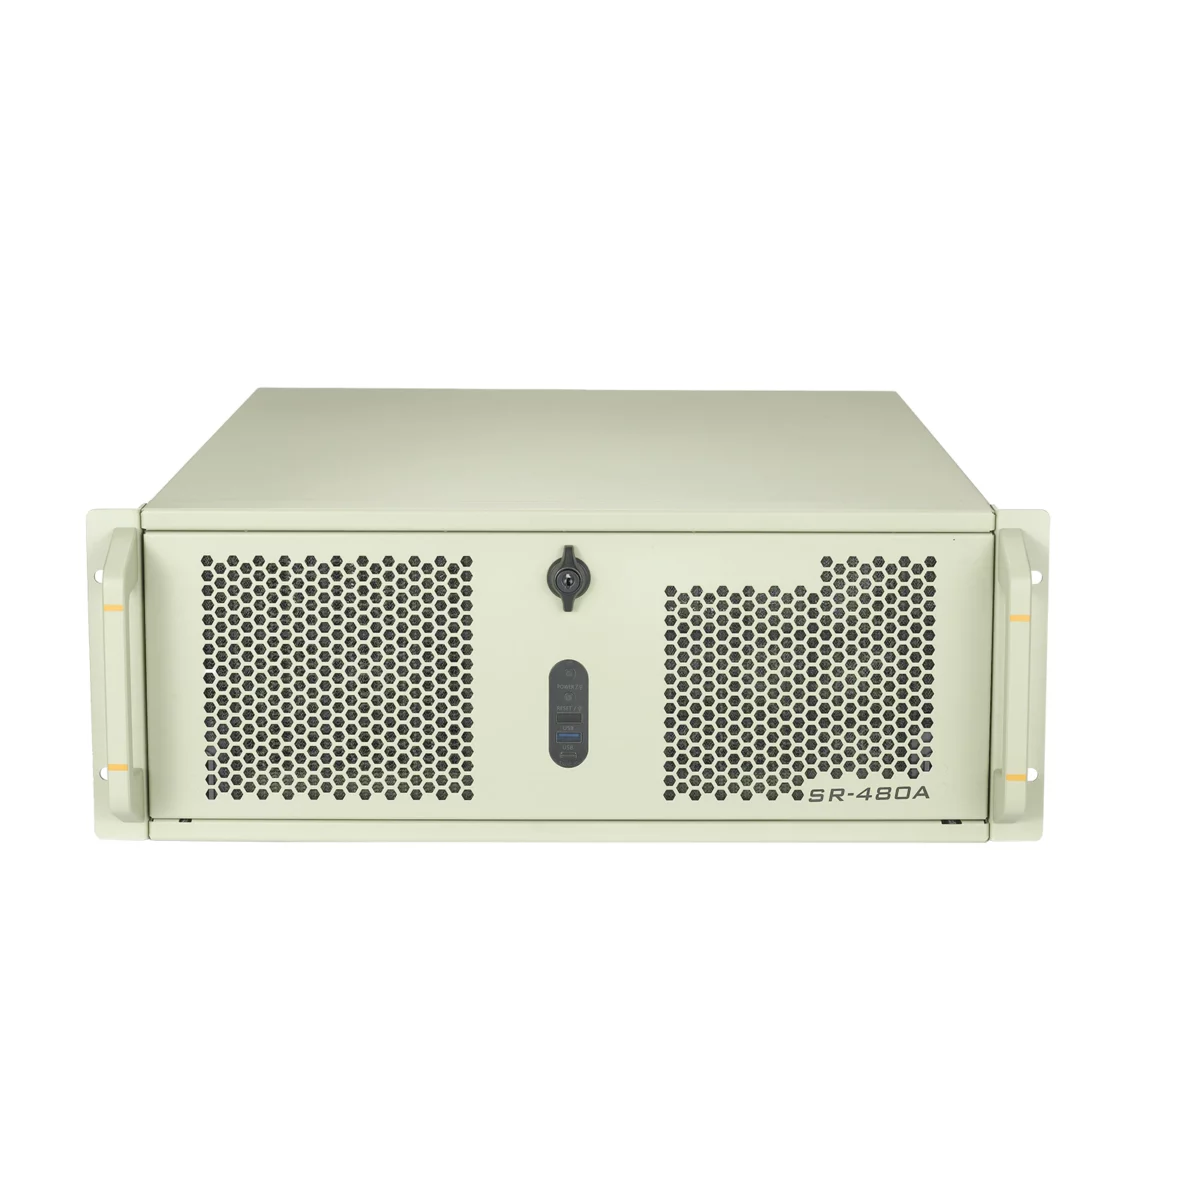 rackmount chassis OC4480AG-Y Front view